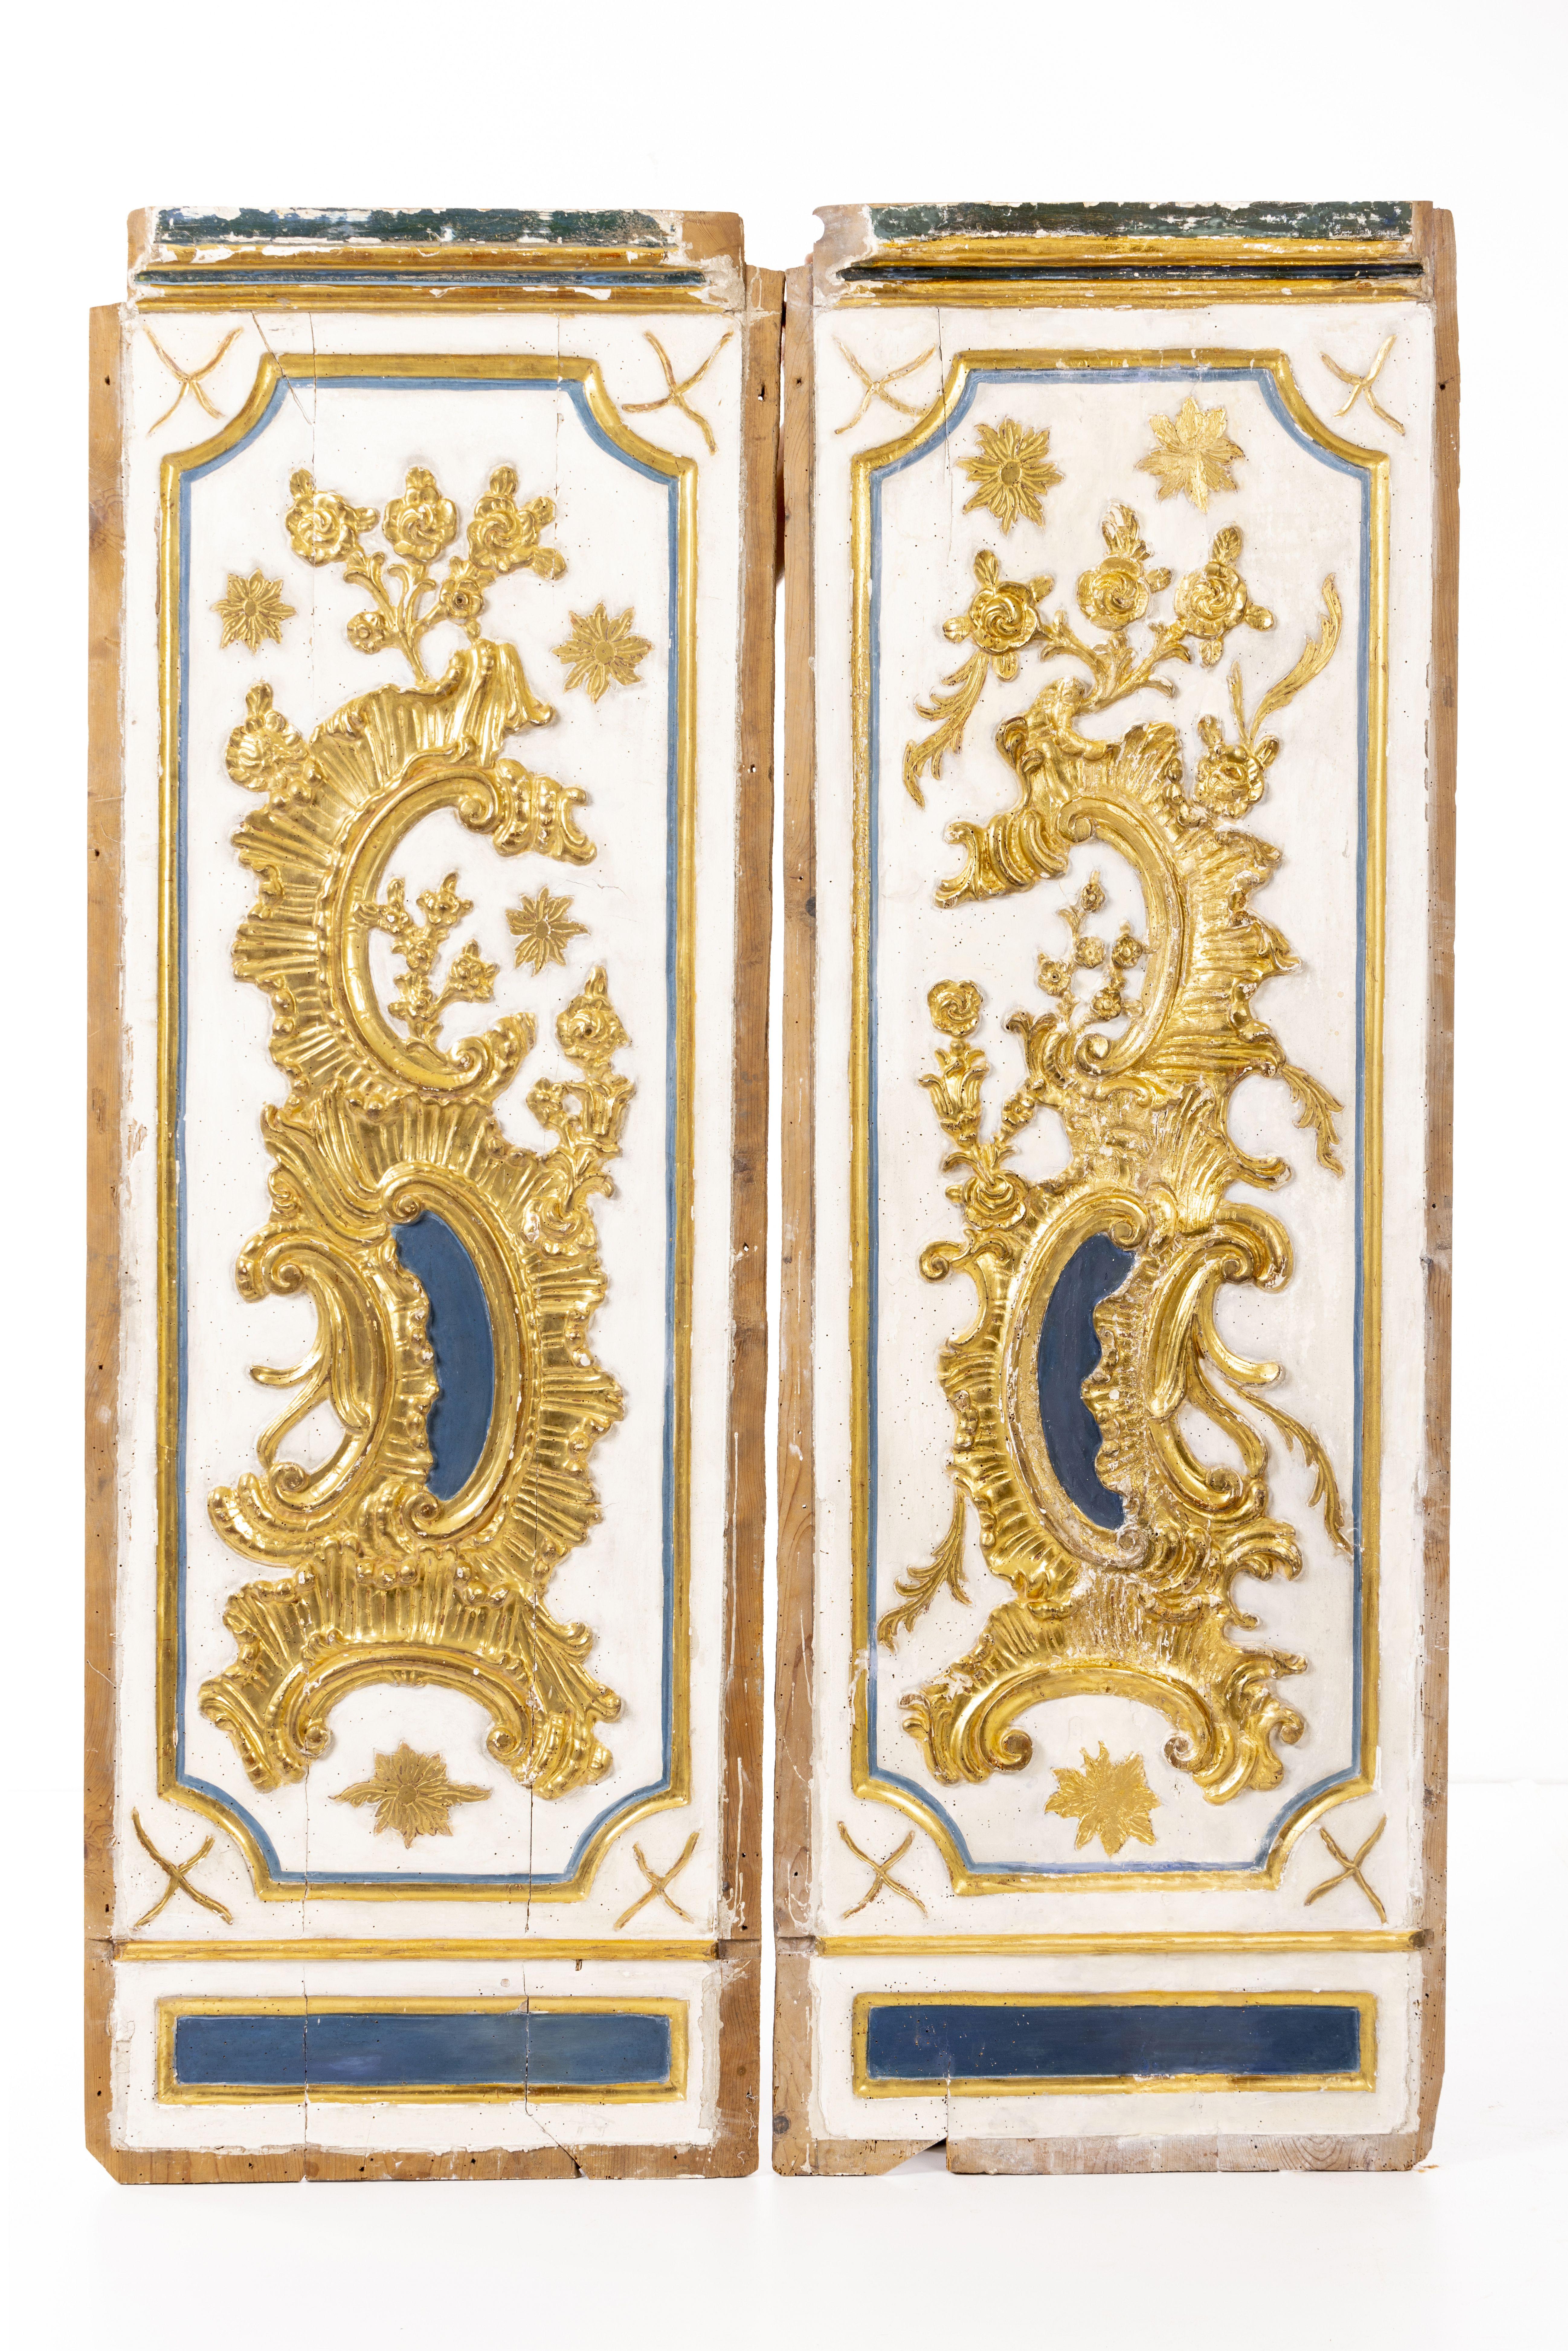 A fine and rare pair of Spanish Baroque carved giltwood boiserie panels, with part polychrome decoration showing exquisite carving of rocaille floral and shell elements.